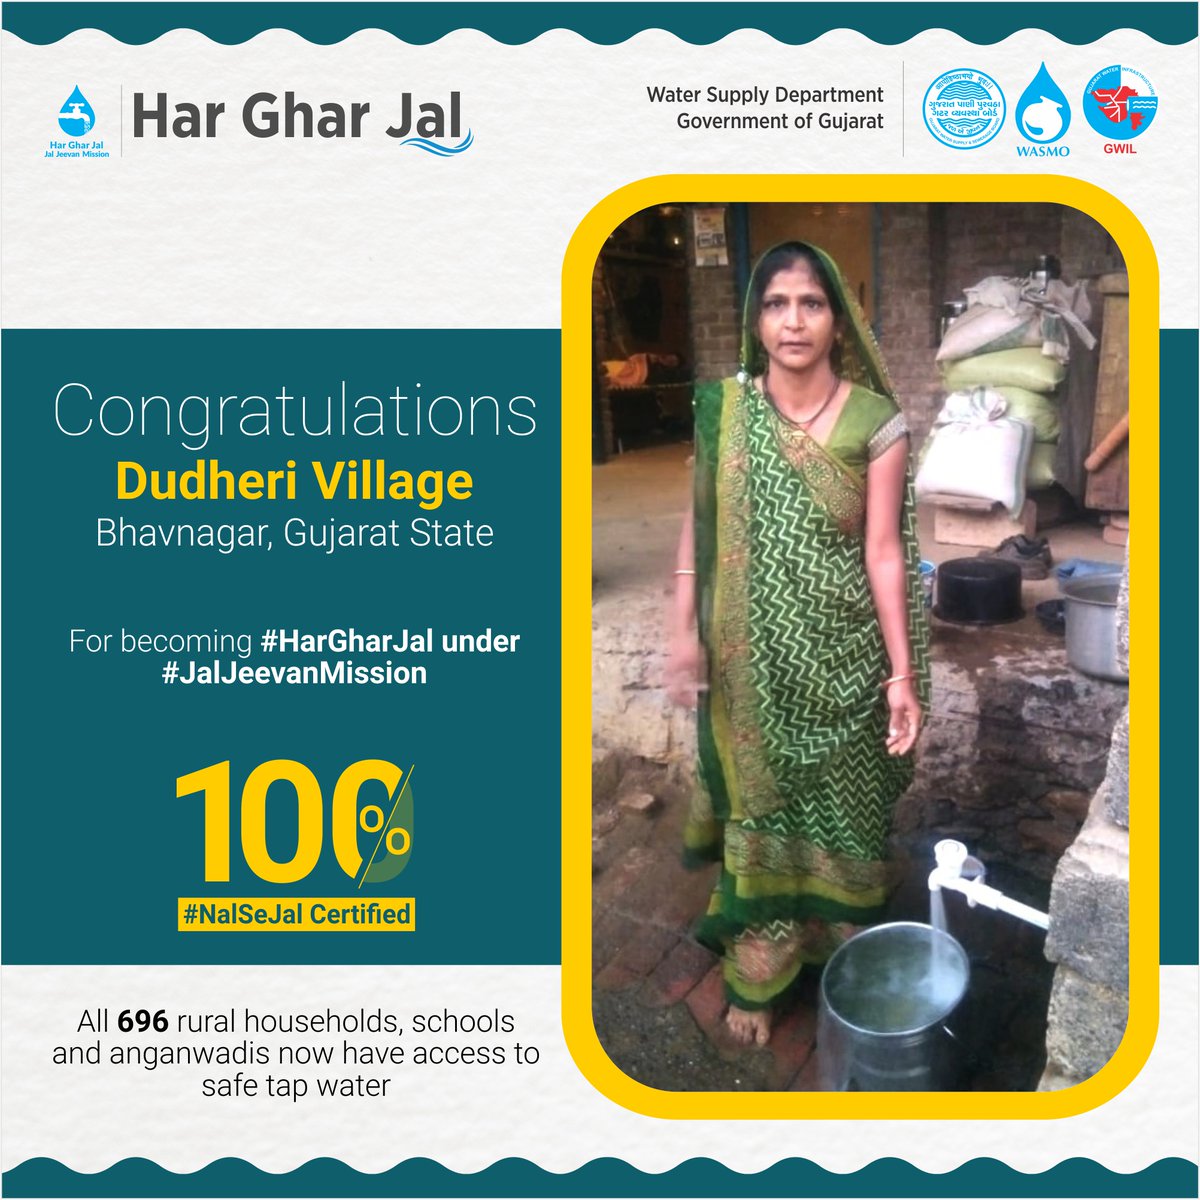 Congratulations to all the people of Dudheri Village of #Bhavnagar, #Gujarat State, for becoming 100% #HarGharNalSeJal certified. All 696 rural households, schools and anganwadis are now getting safe tap water under #JalJeevanMission.